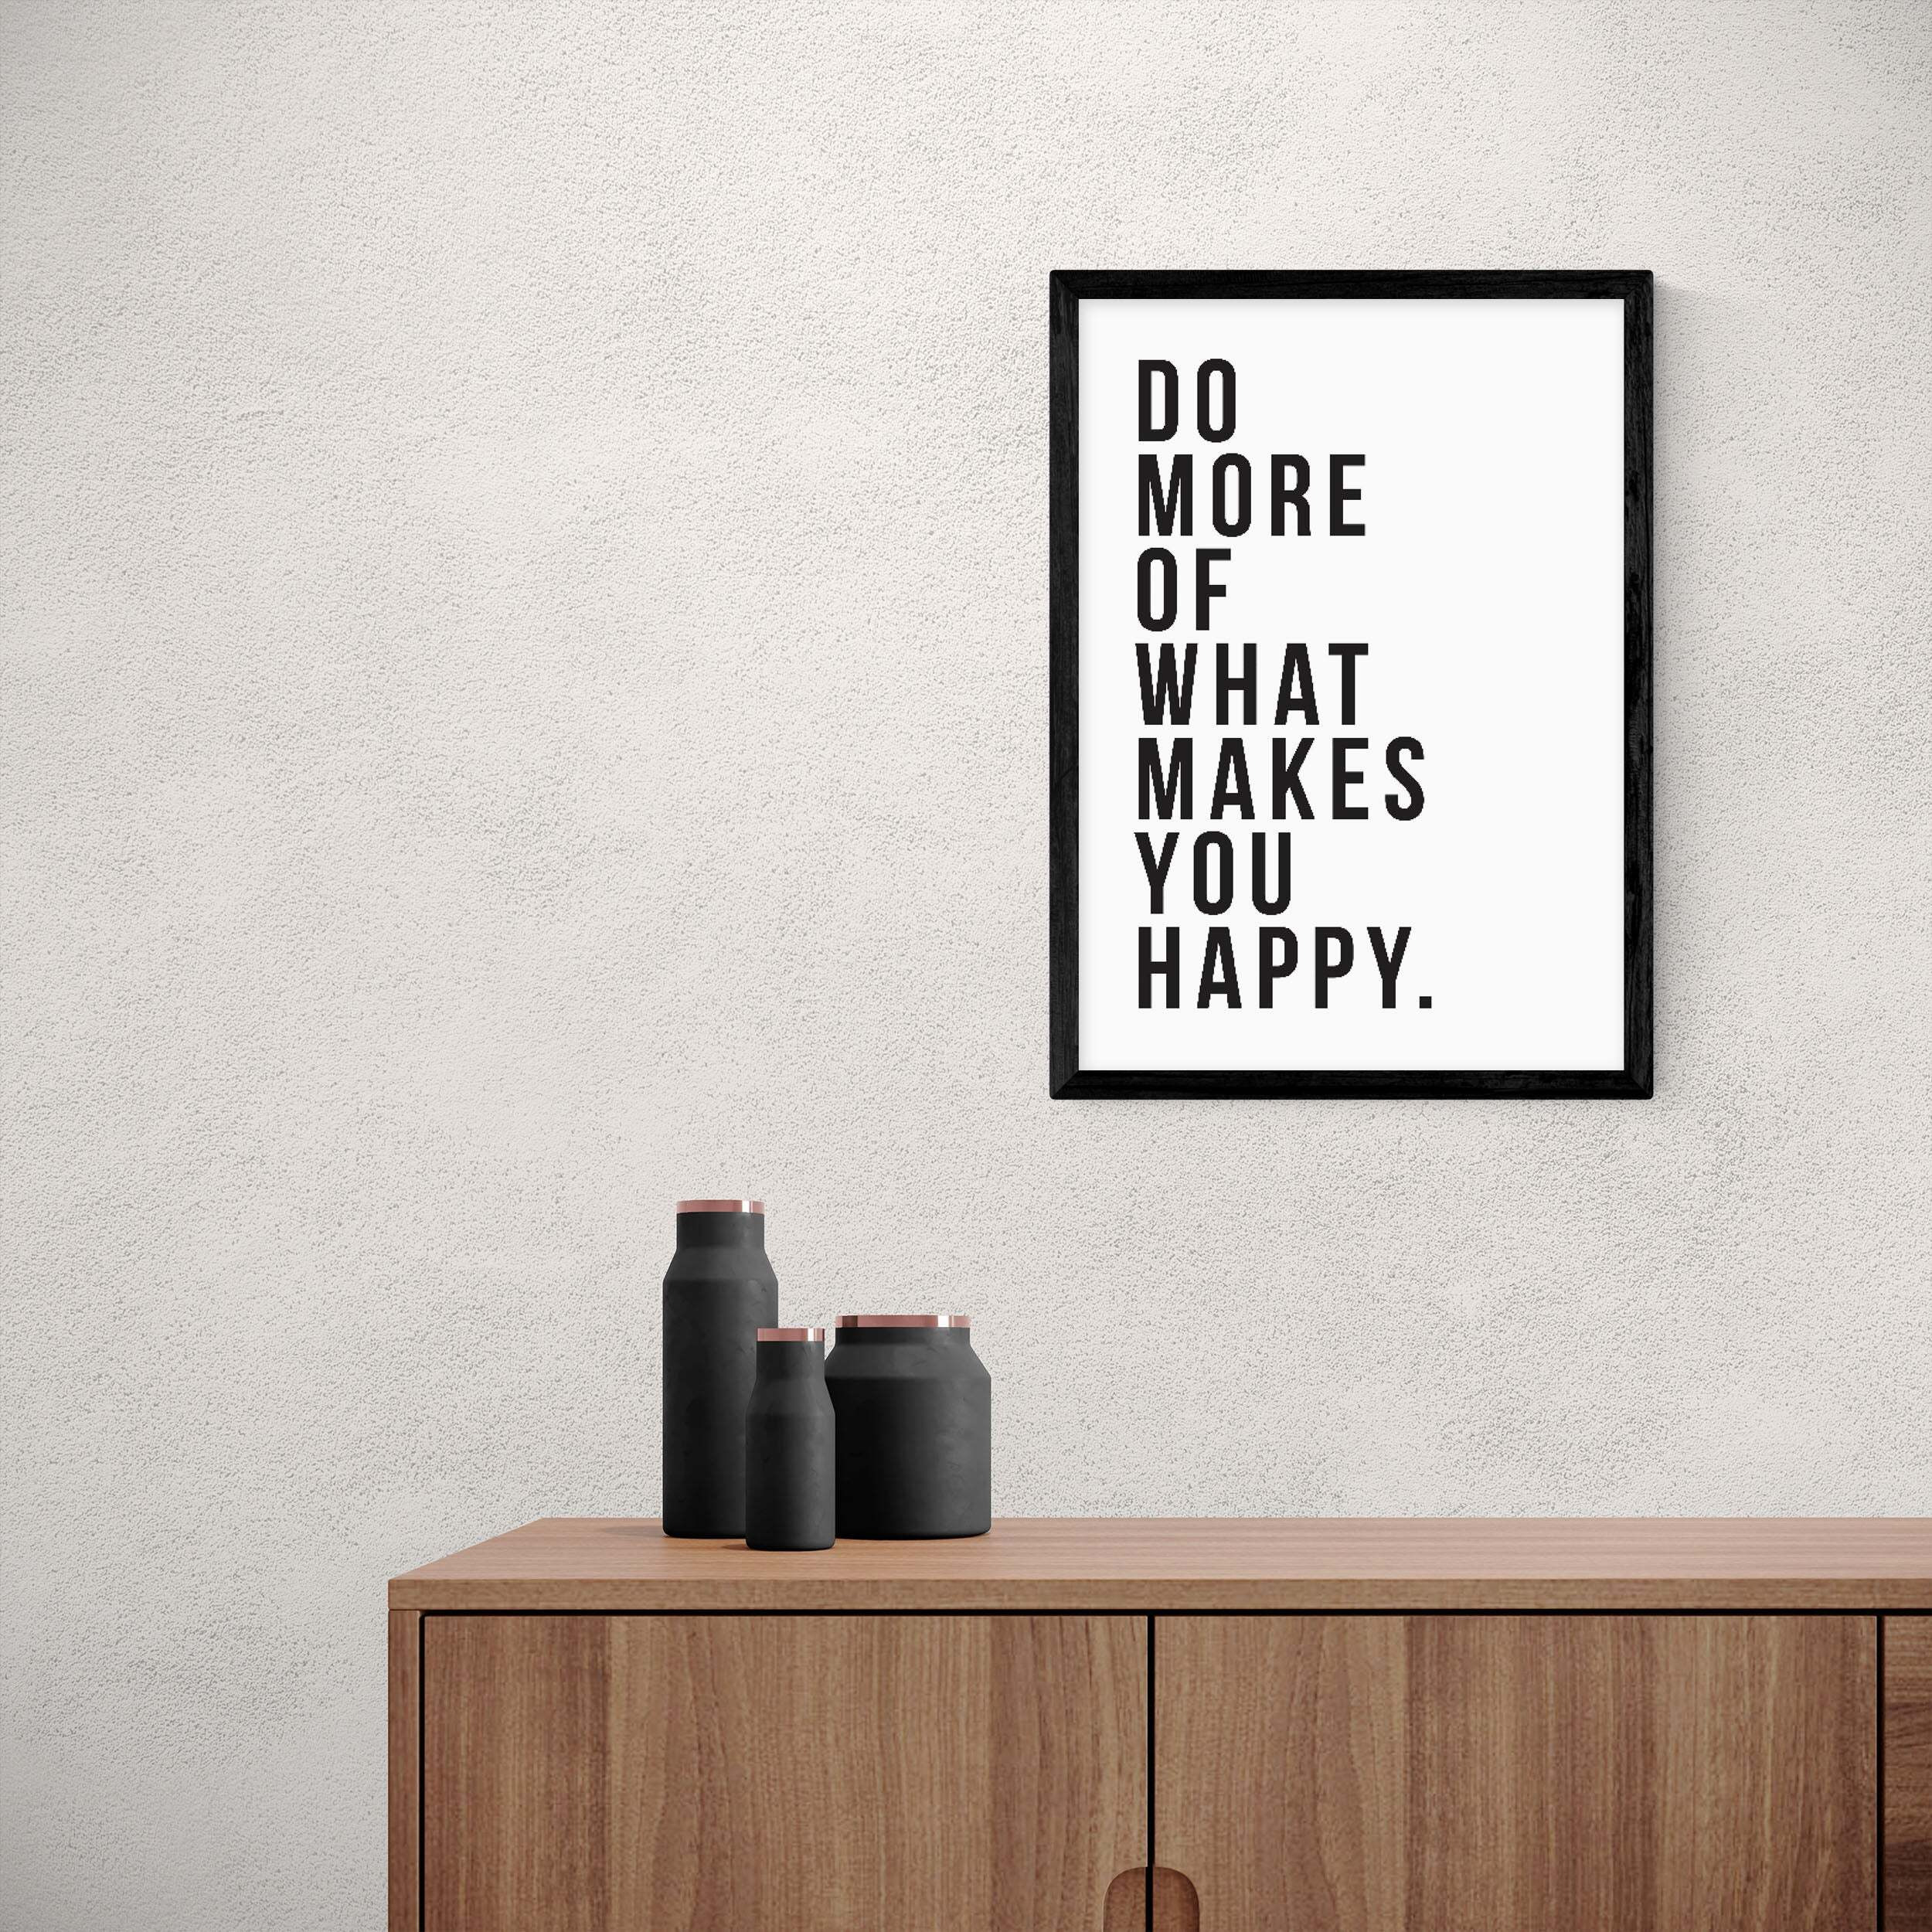 East End Prints Do More of What Makes You Happy Print Black/White